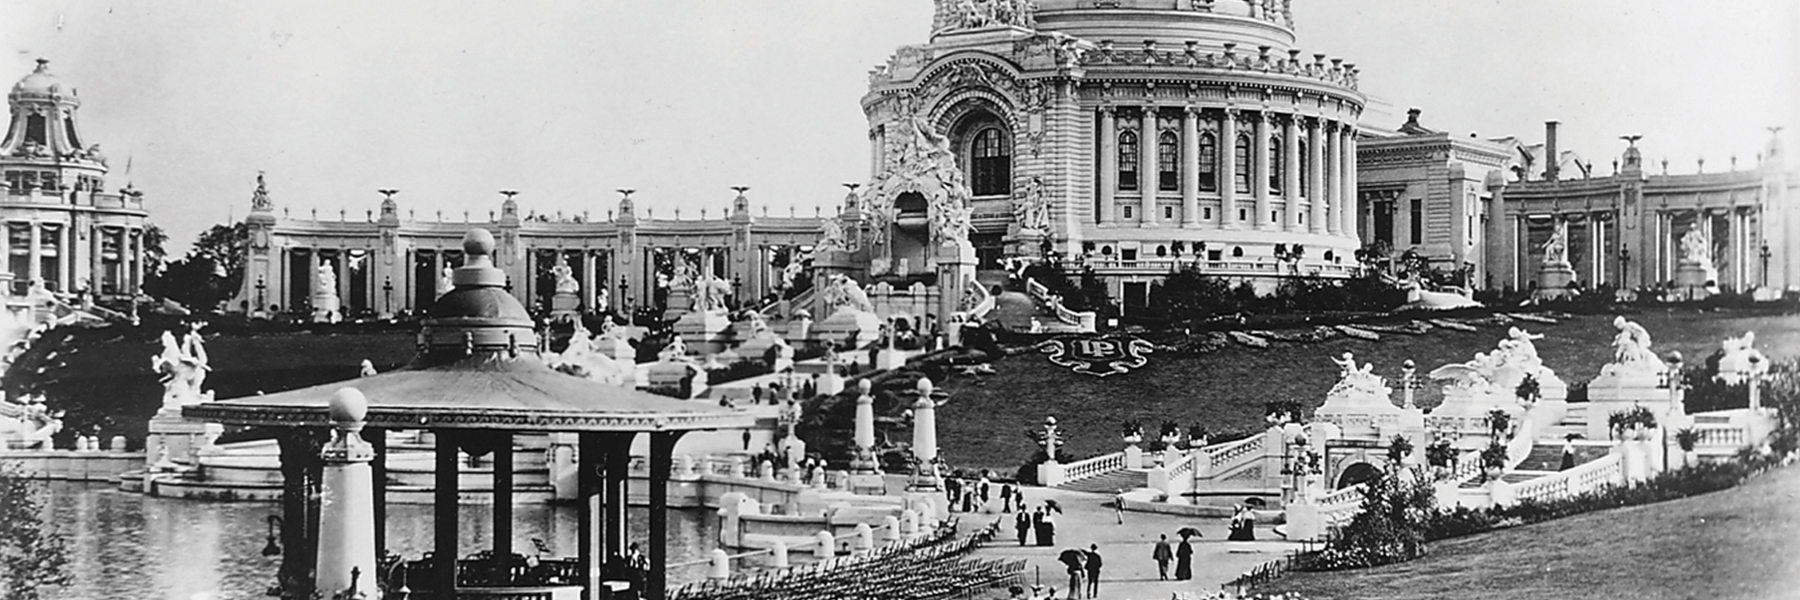 The 1904 World's Fair took place in Forest Park in St. Louis.